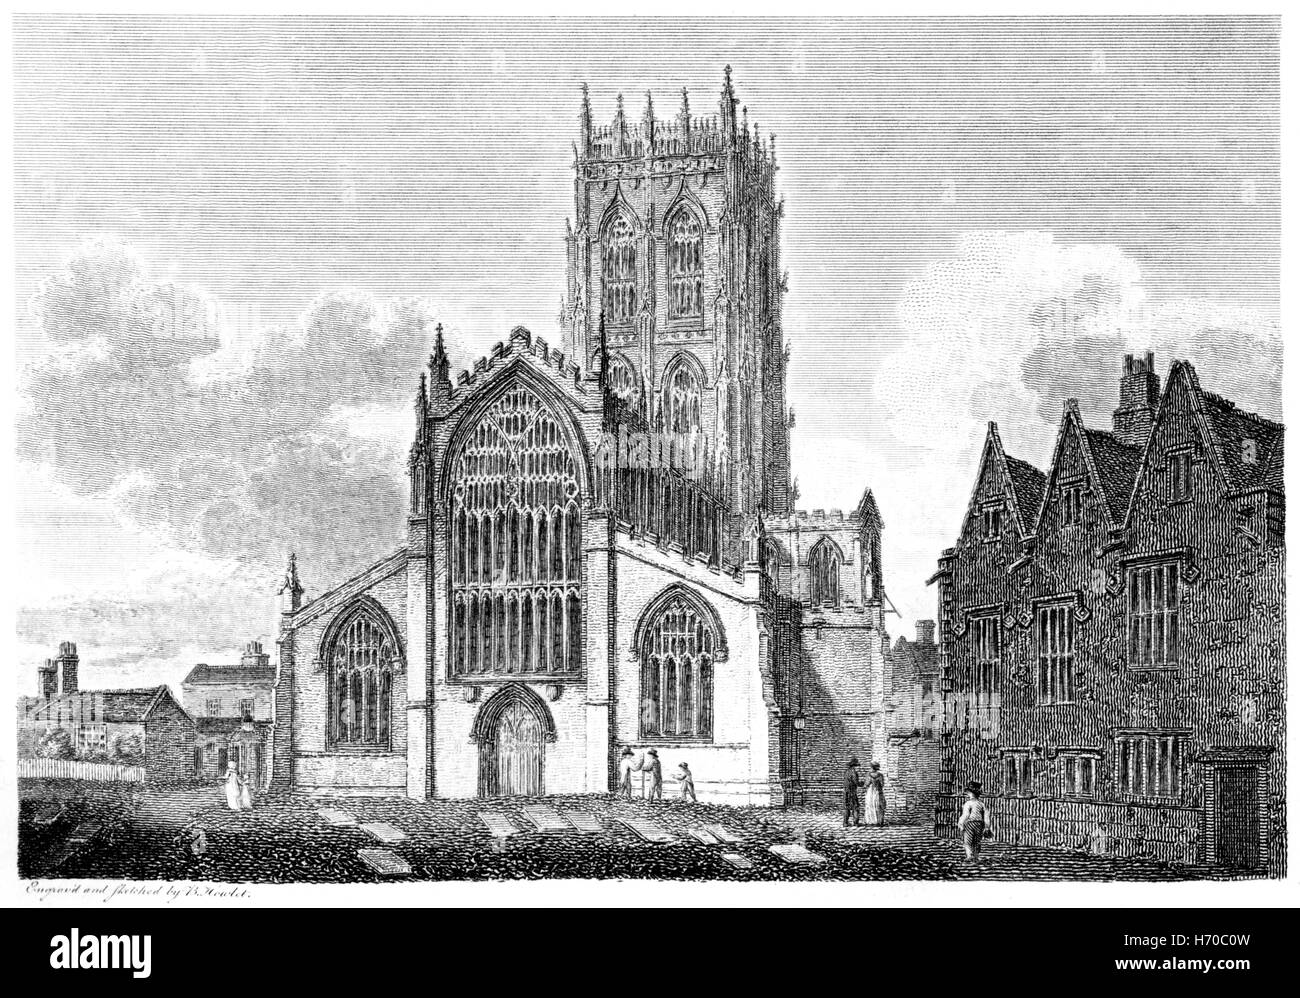 An engraving of the Church of St George, Doncaster, Yorkshire scanned at high resolution from a book printed in 1812. Stock Photo